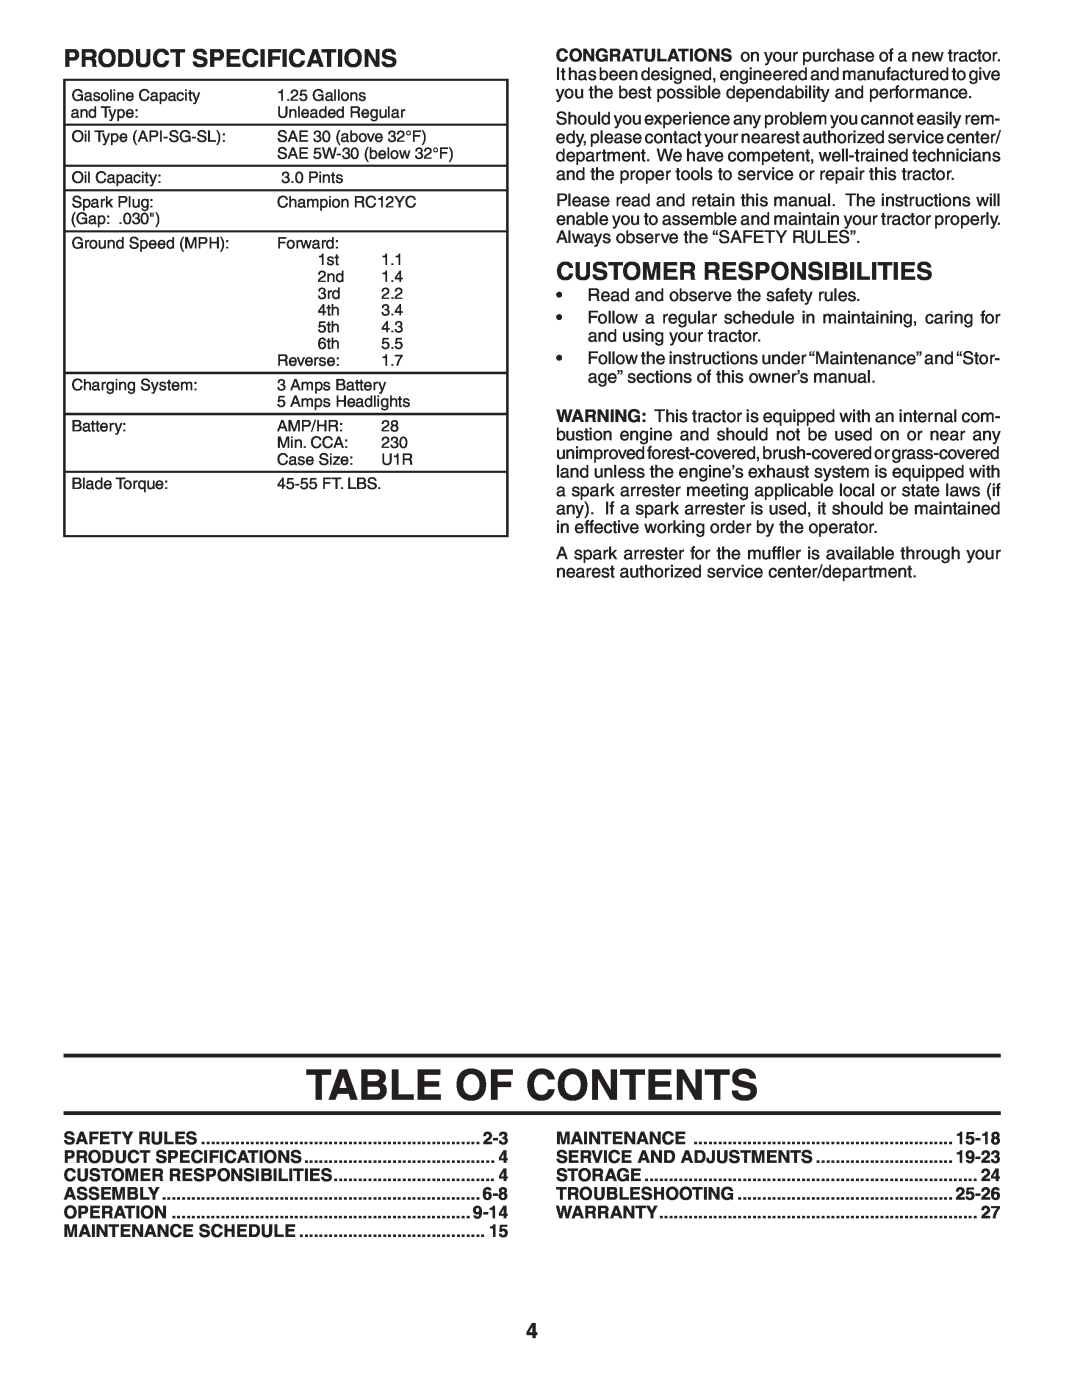 Weed Eater 60614, 405209 manual Table Of Contents, Product Specifications, Customer Responsibilities 